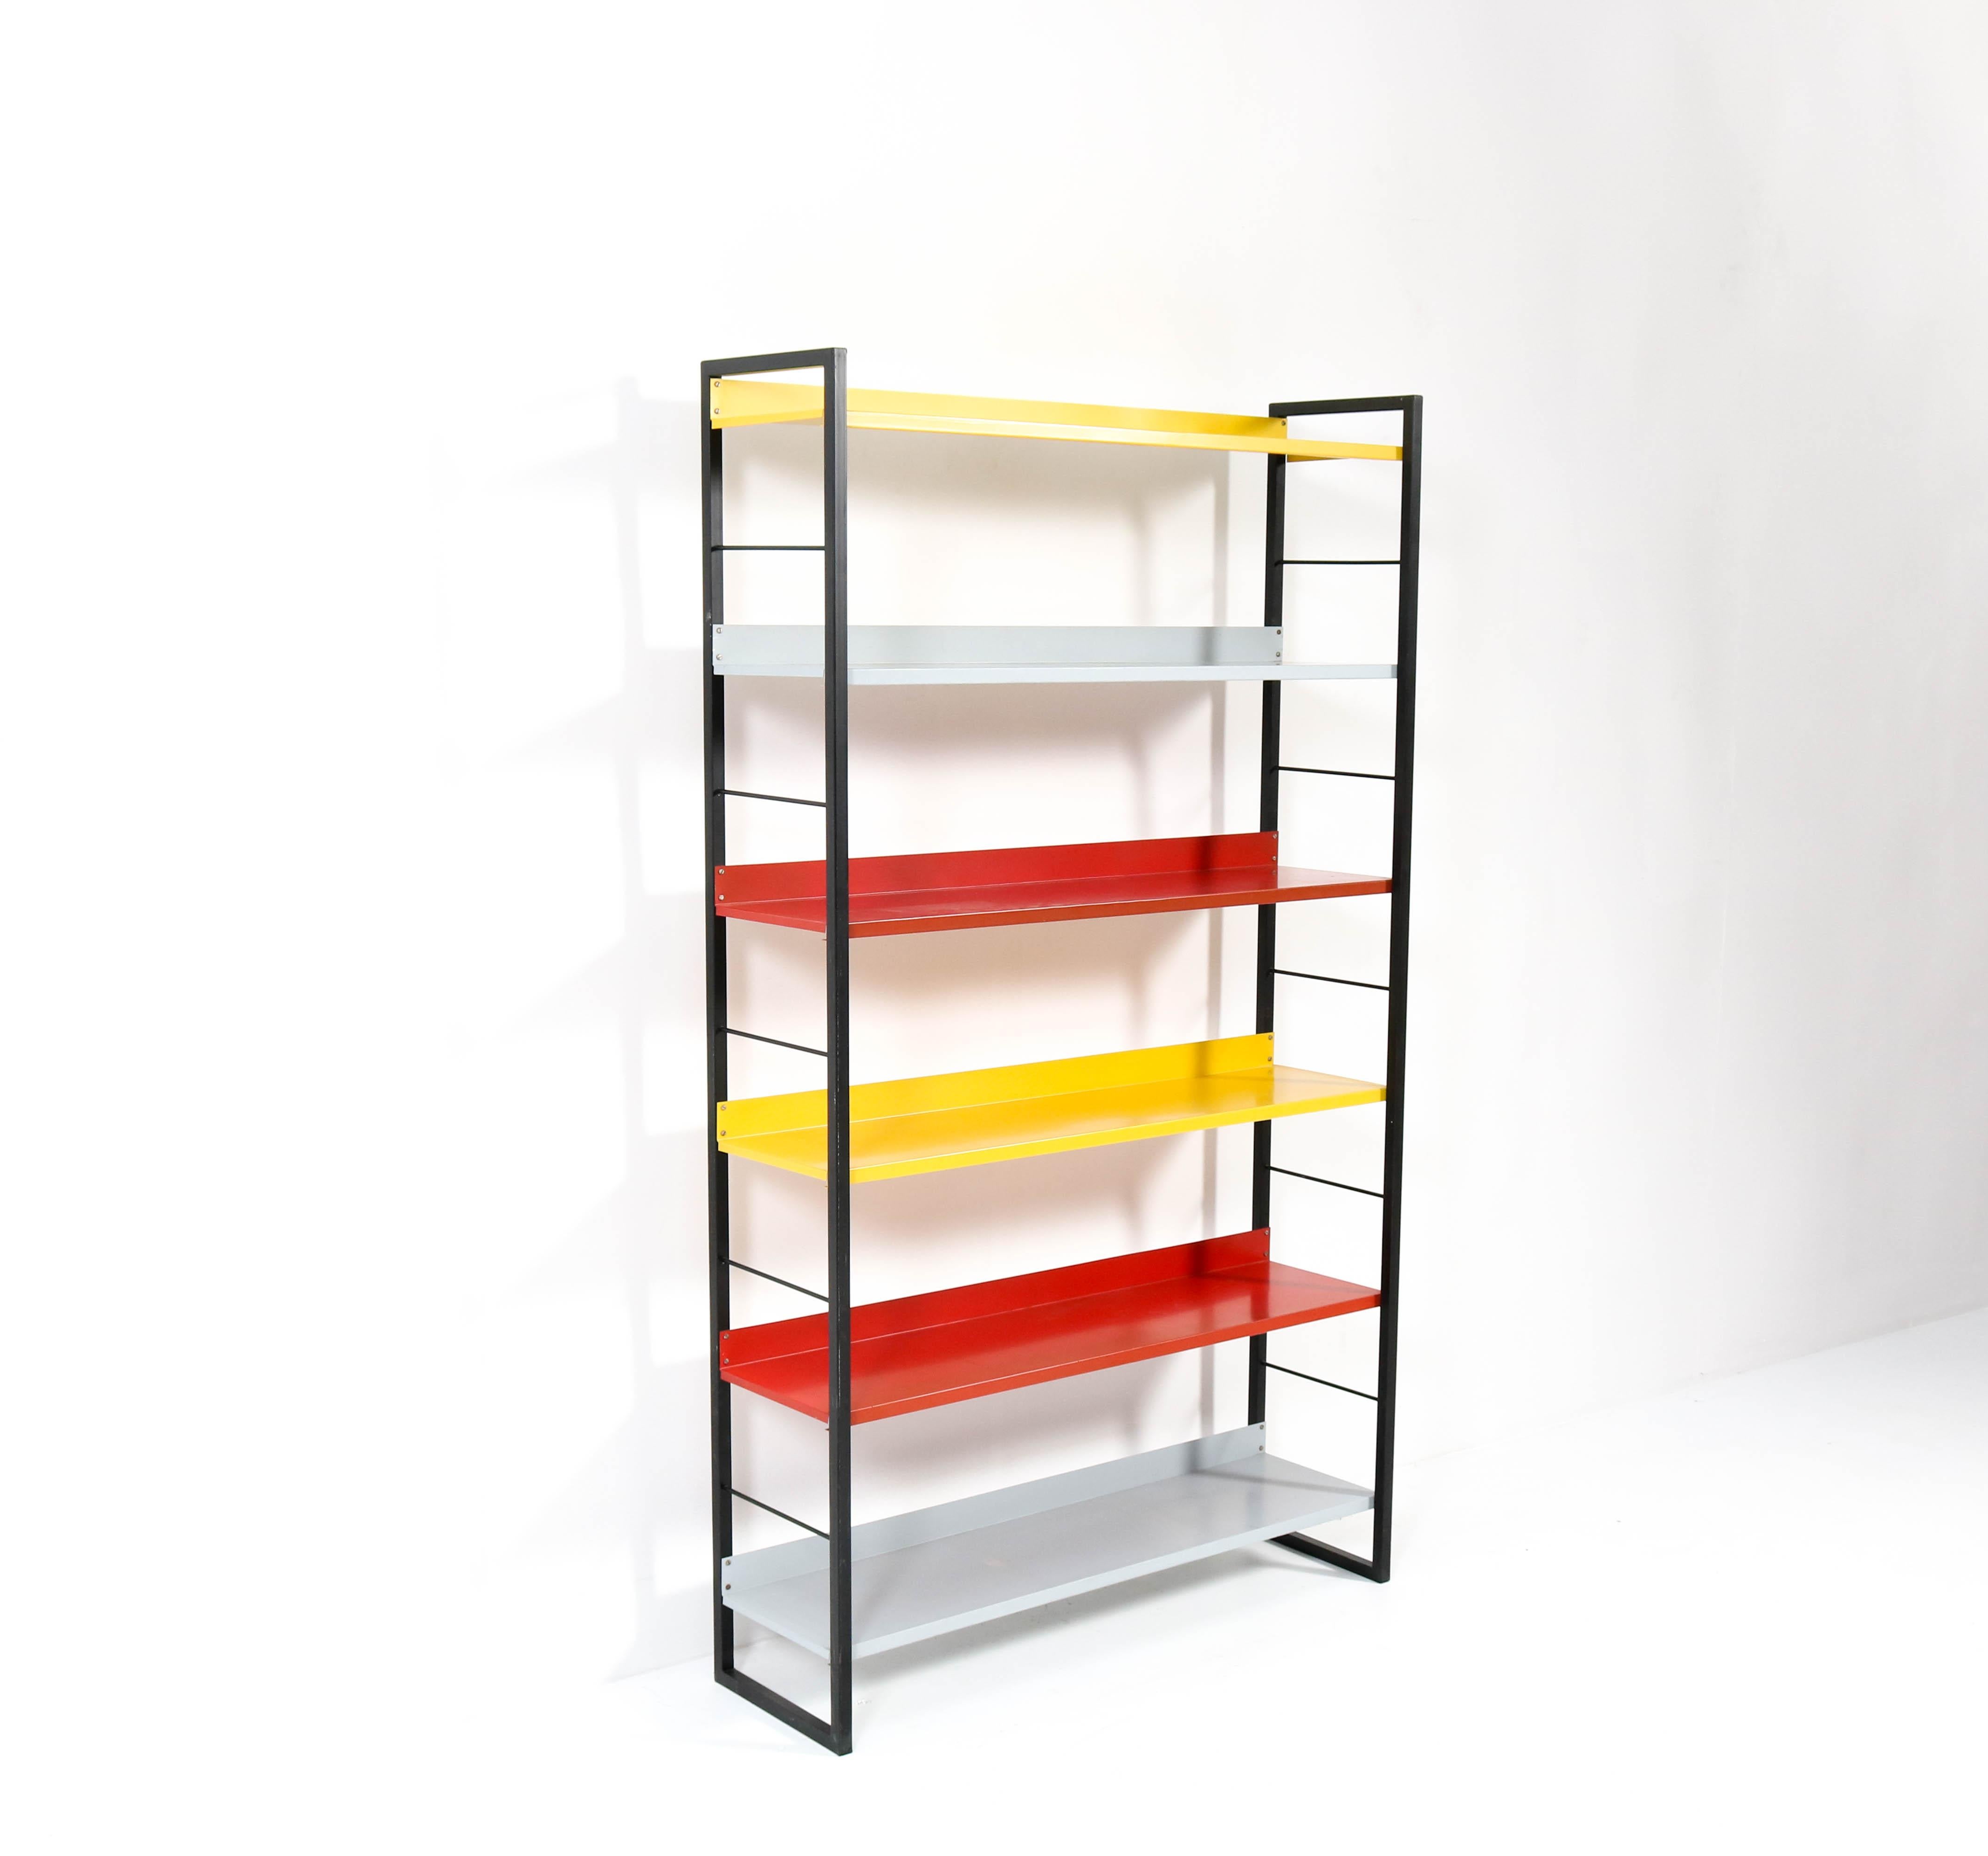 Dutch Mid-Century Modern Lacquered Metal Bookcase by Adriaan Dekker for Tomado, 1958